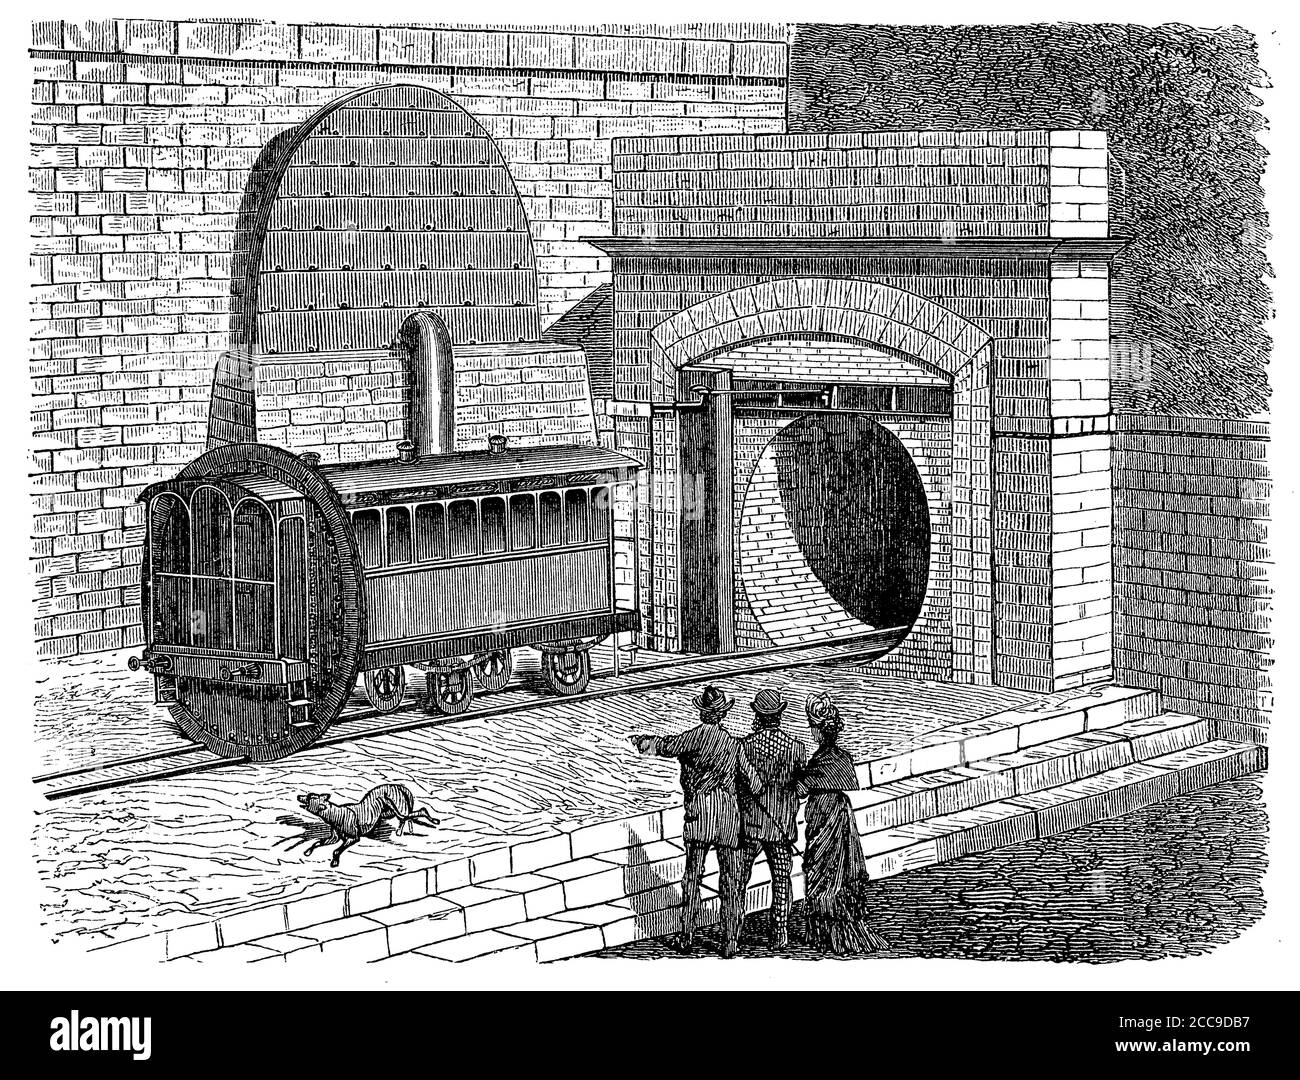 Pneumatic railway London - Sydenham on the grounds of the Crystal Palace,carriage entering a brickwork tunnel of a single rail with opening and closing valves at the extremities for air-propelling passenger trains, 19th century Stock Photo